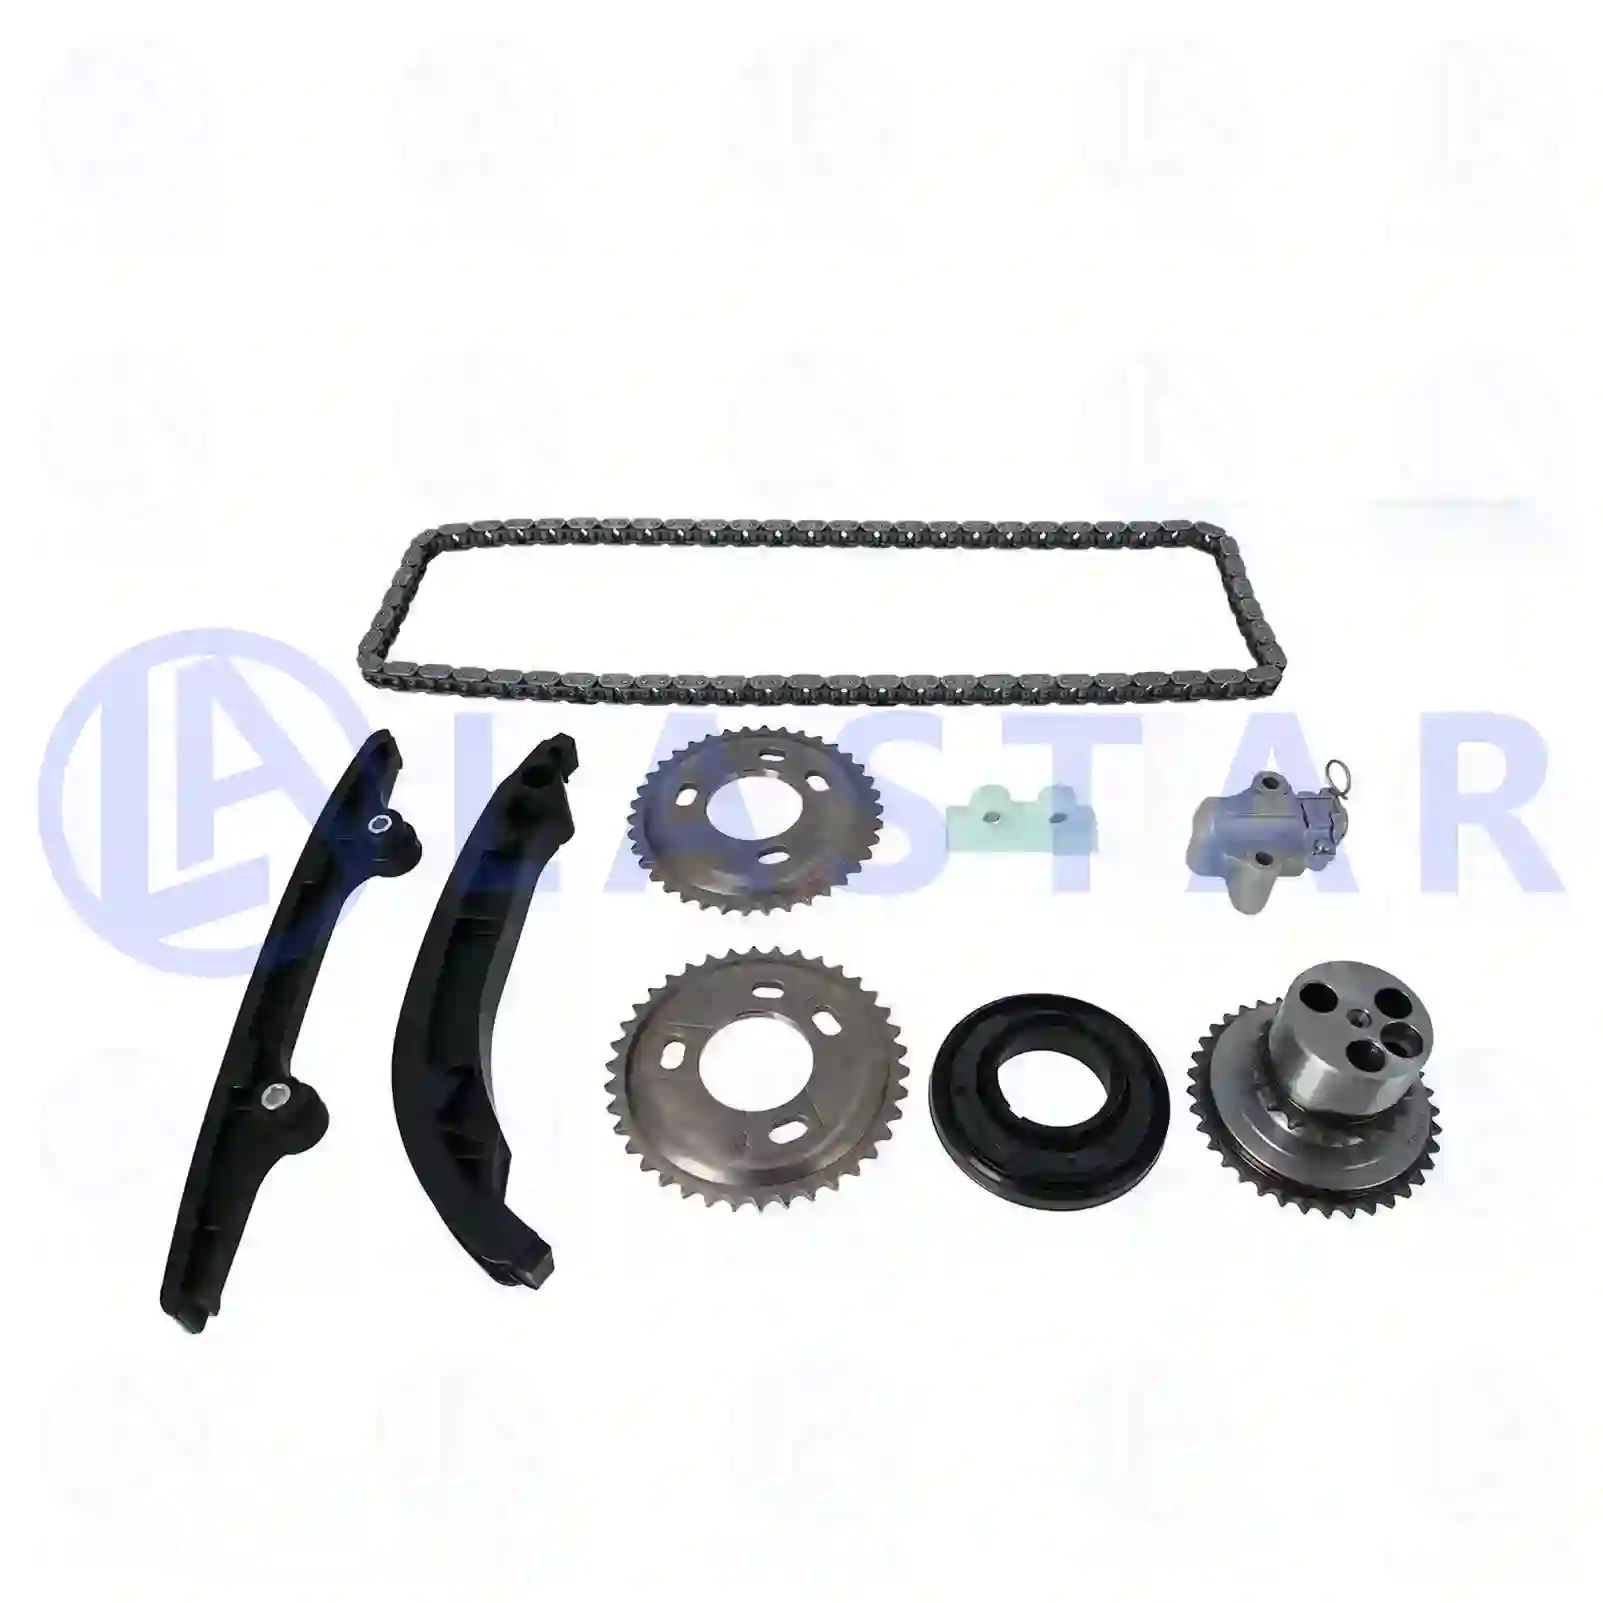 Timing chain kit, 77701088, 1704087S2 ||  77701088 Lastar Spare Part | Truck Spare Parts, Auotomotive Spare Parts Timing chain kit, 77701088, 1704087S2 ||  77701088 Lastar Spare Part | Truck Spare Parts, Auotomotive Spare Parts